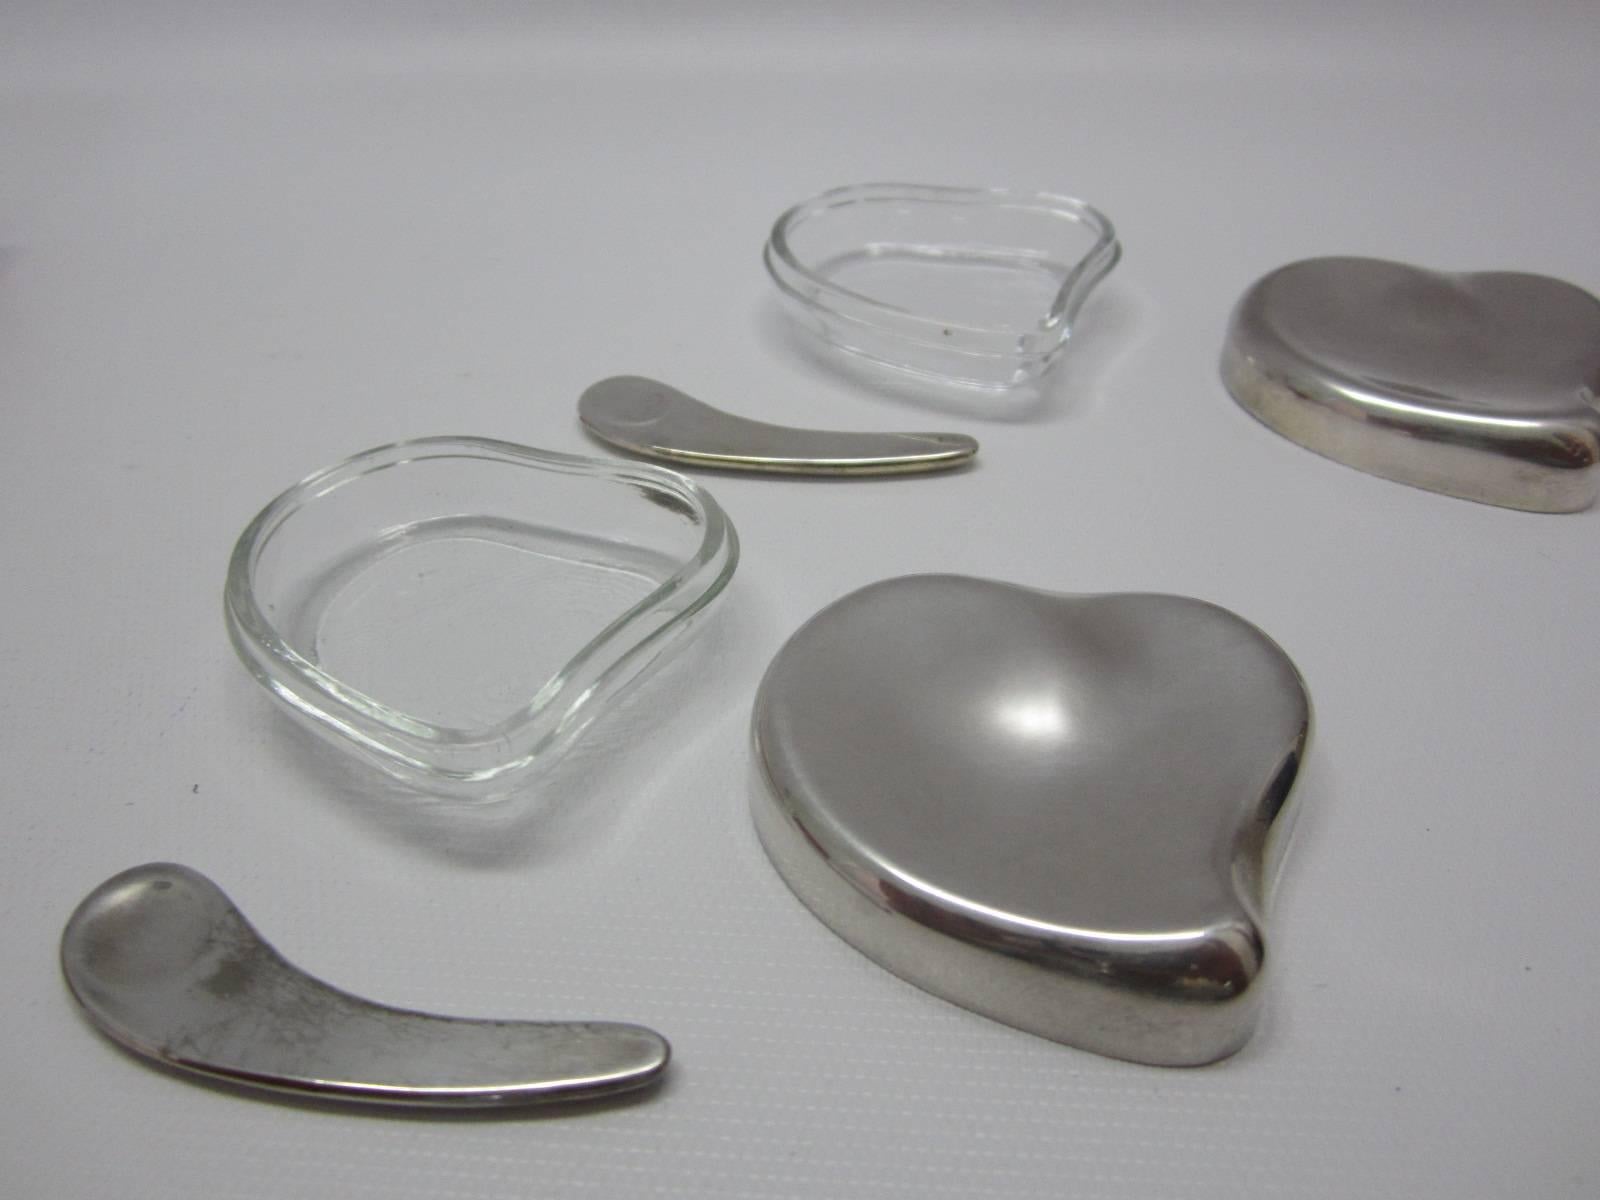 American Elsa Peretti for Halston Glass and Steel Caviar Dishes with Spoons